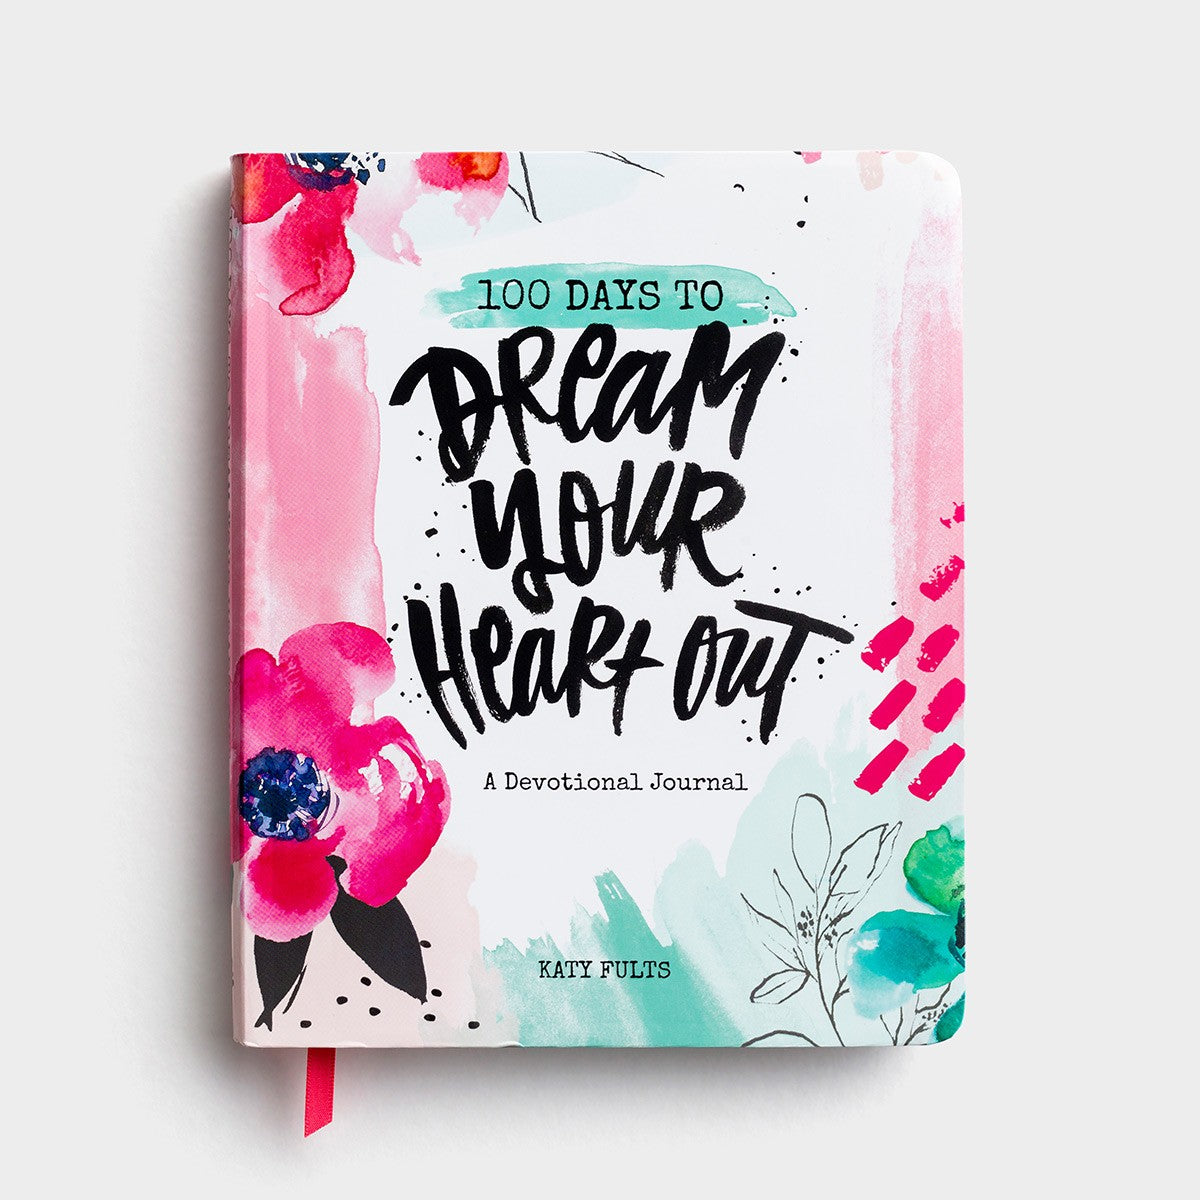 100 Days to Dream Your Heart Out - Devotional Journal - Southern Grace Creations